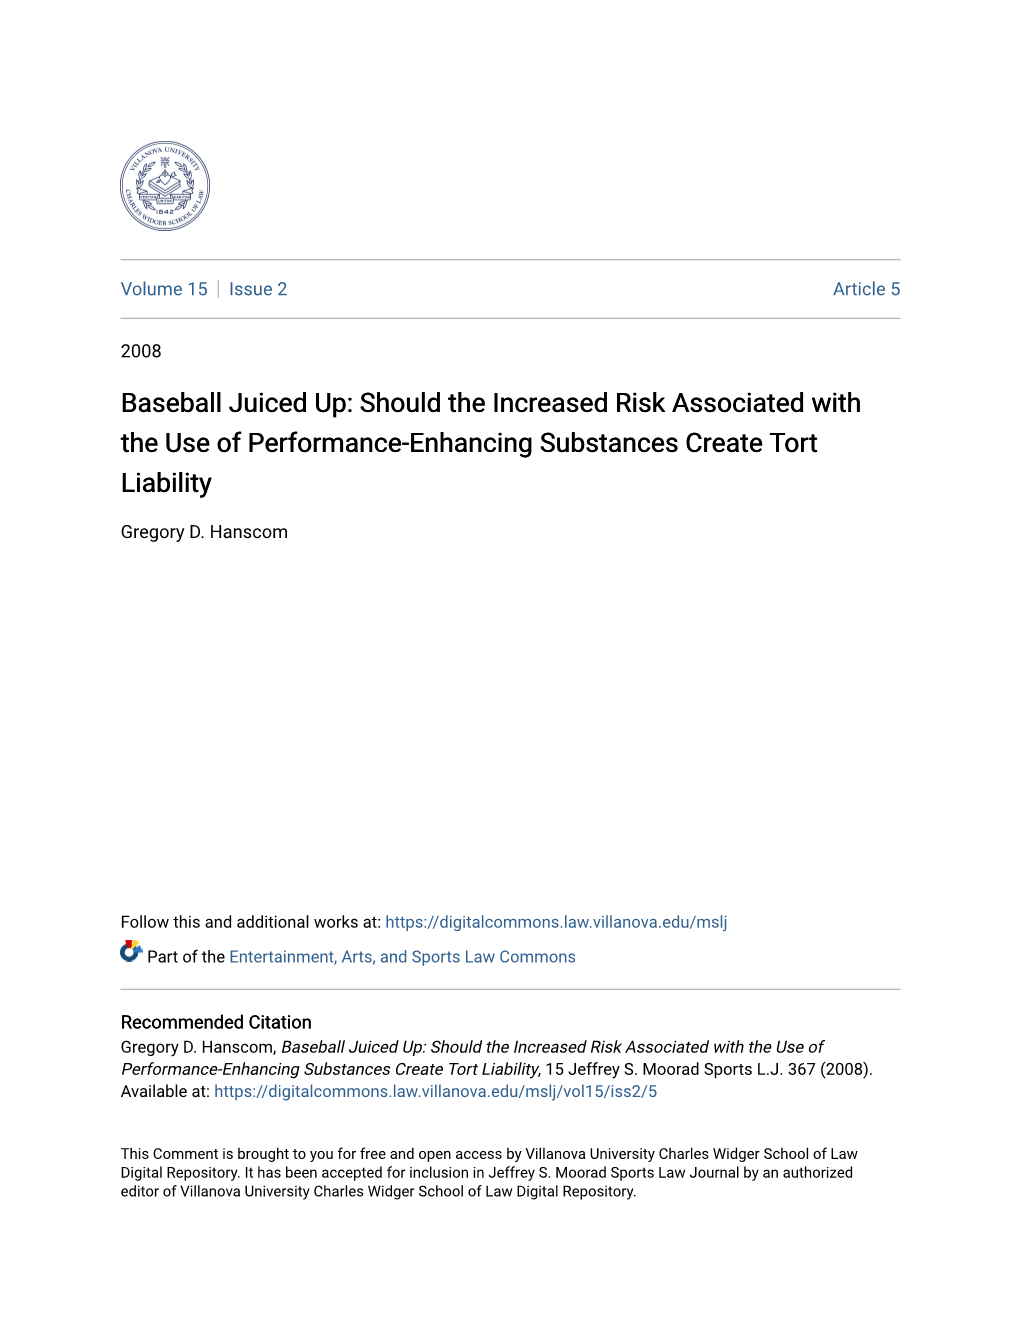 Baseball Juiced Up: Should the Increased Risk Associated with the Use of Performance-Enhancing Substances Create Tort Liability